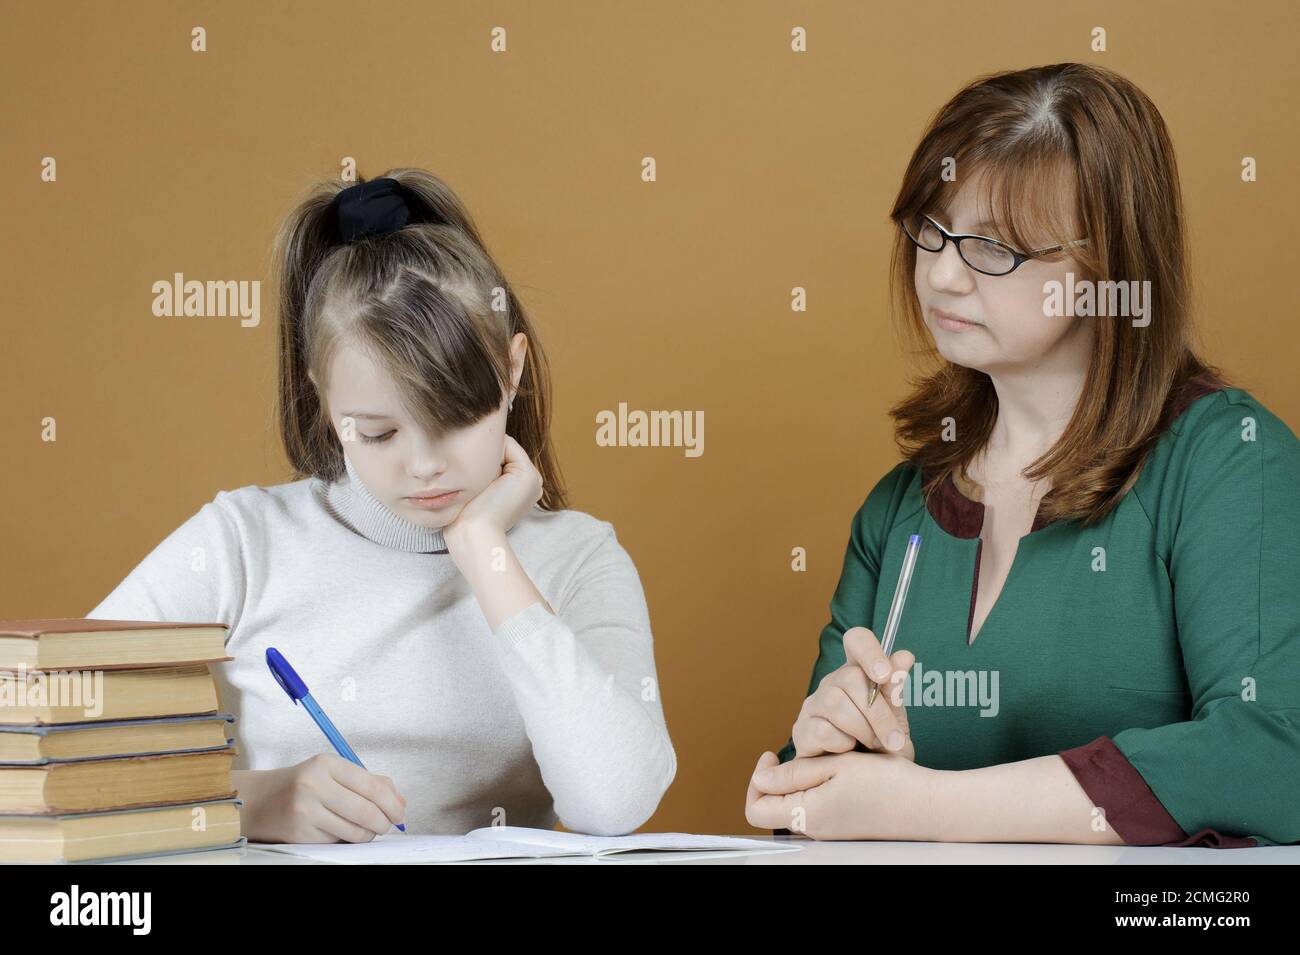 The child makes school lessons under the supervision of her mother. Stock Photo